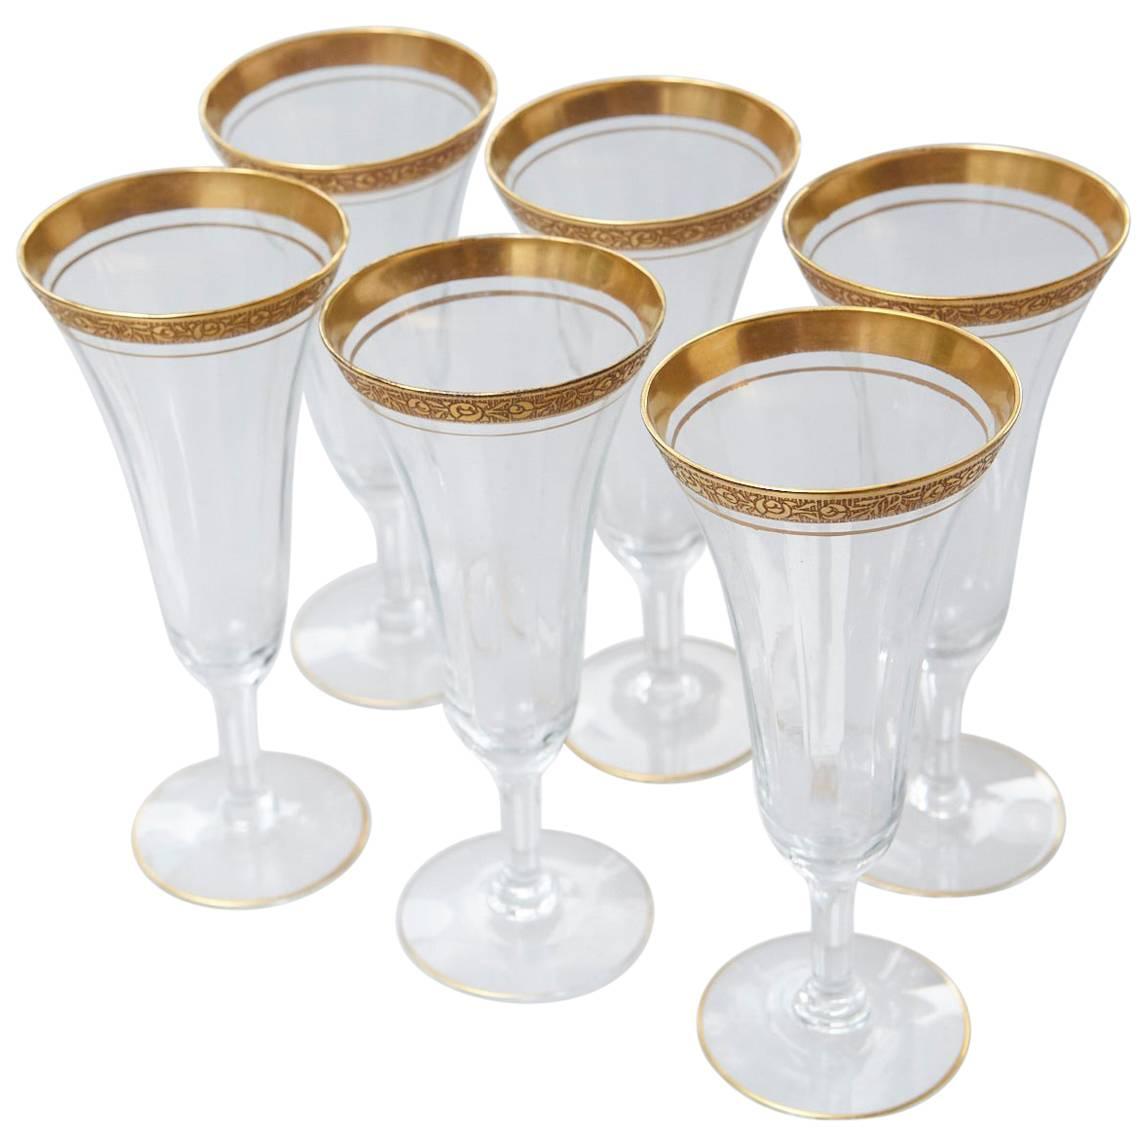 Early 20th Century Set of 6 Floral Gilt Rimmed Bohemia Crystal Champagne Flutes